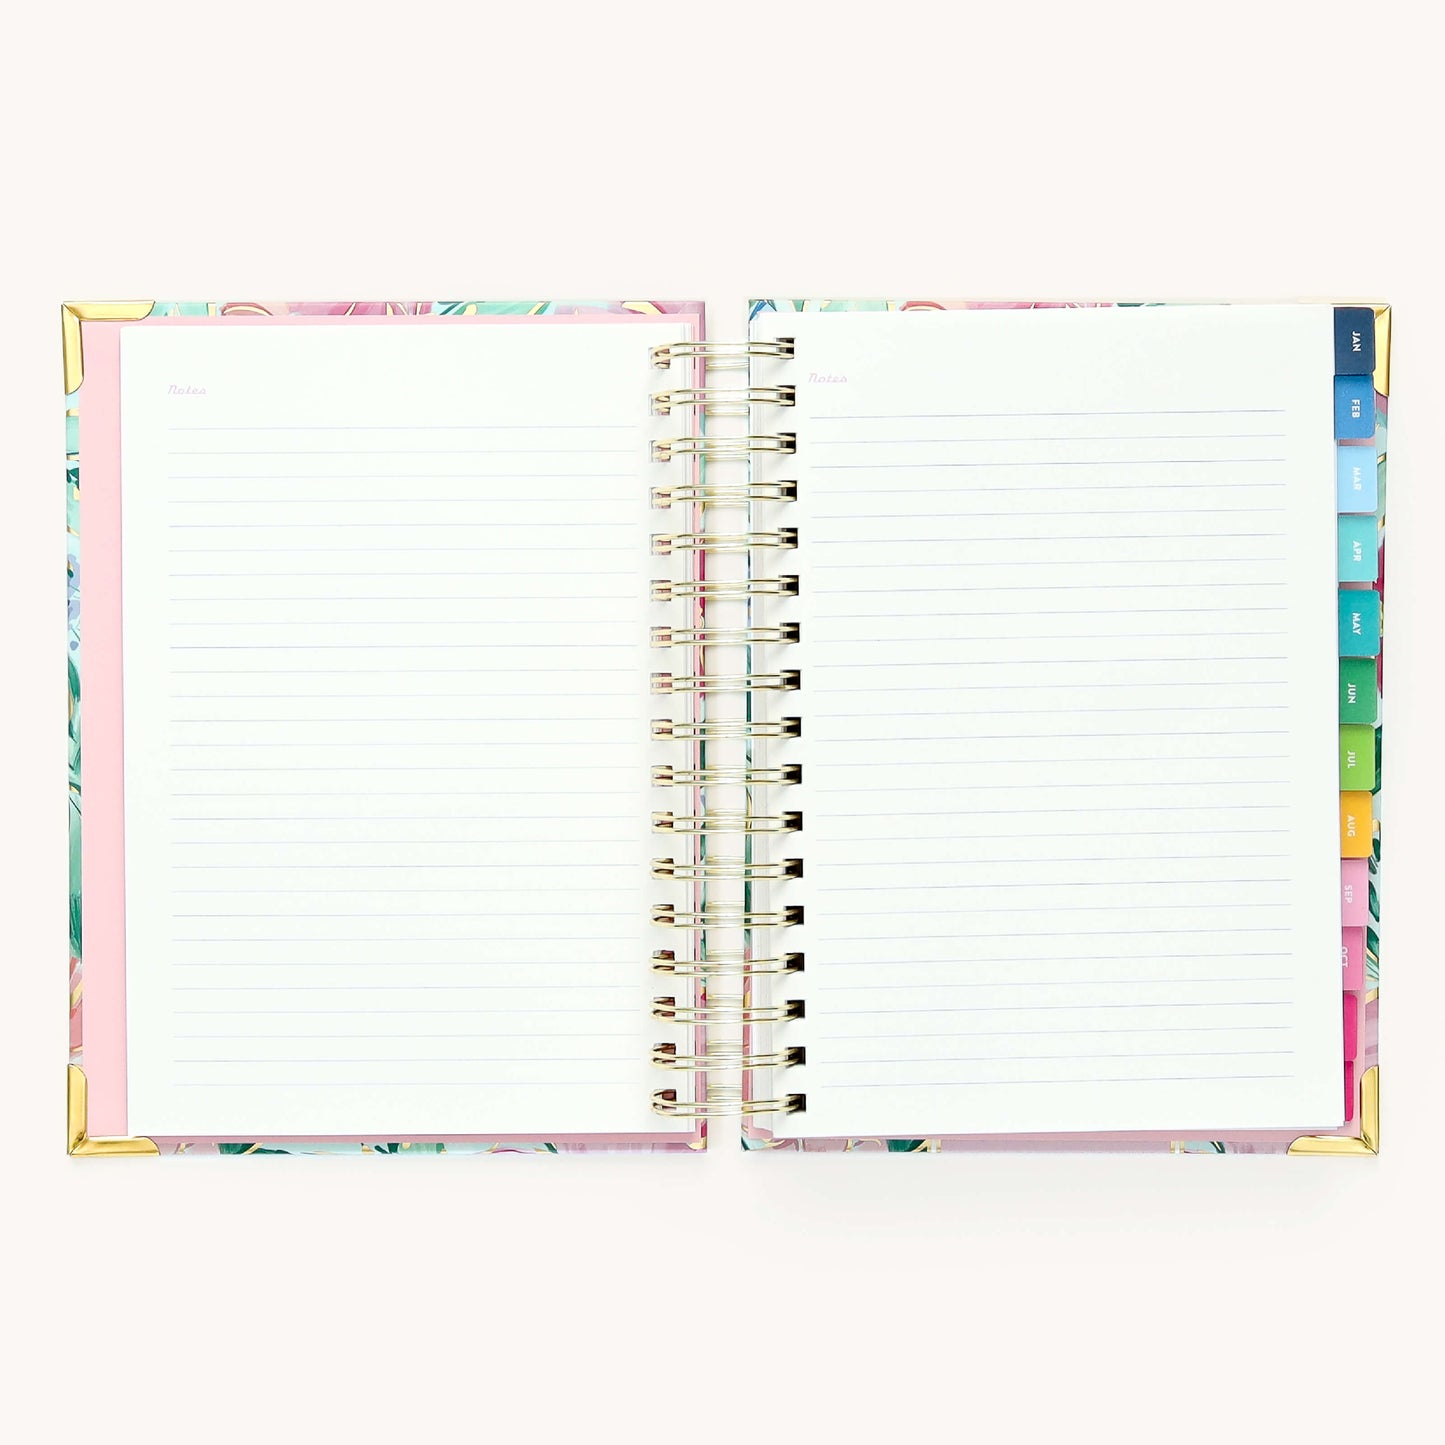 NOTES PAGES